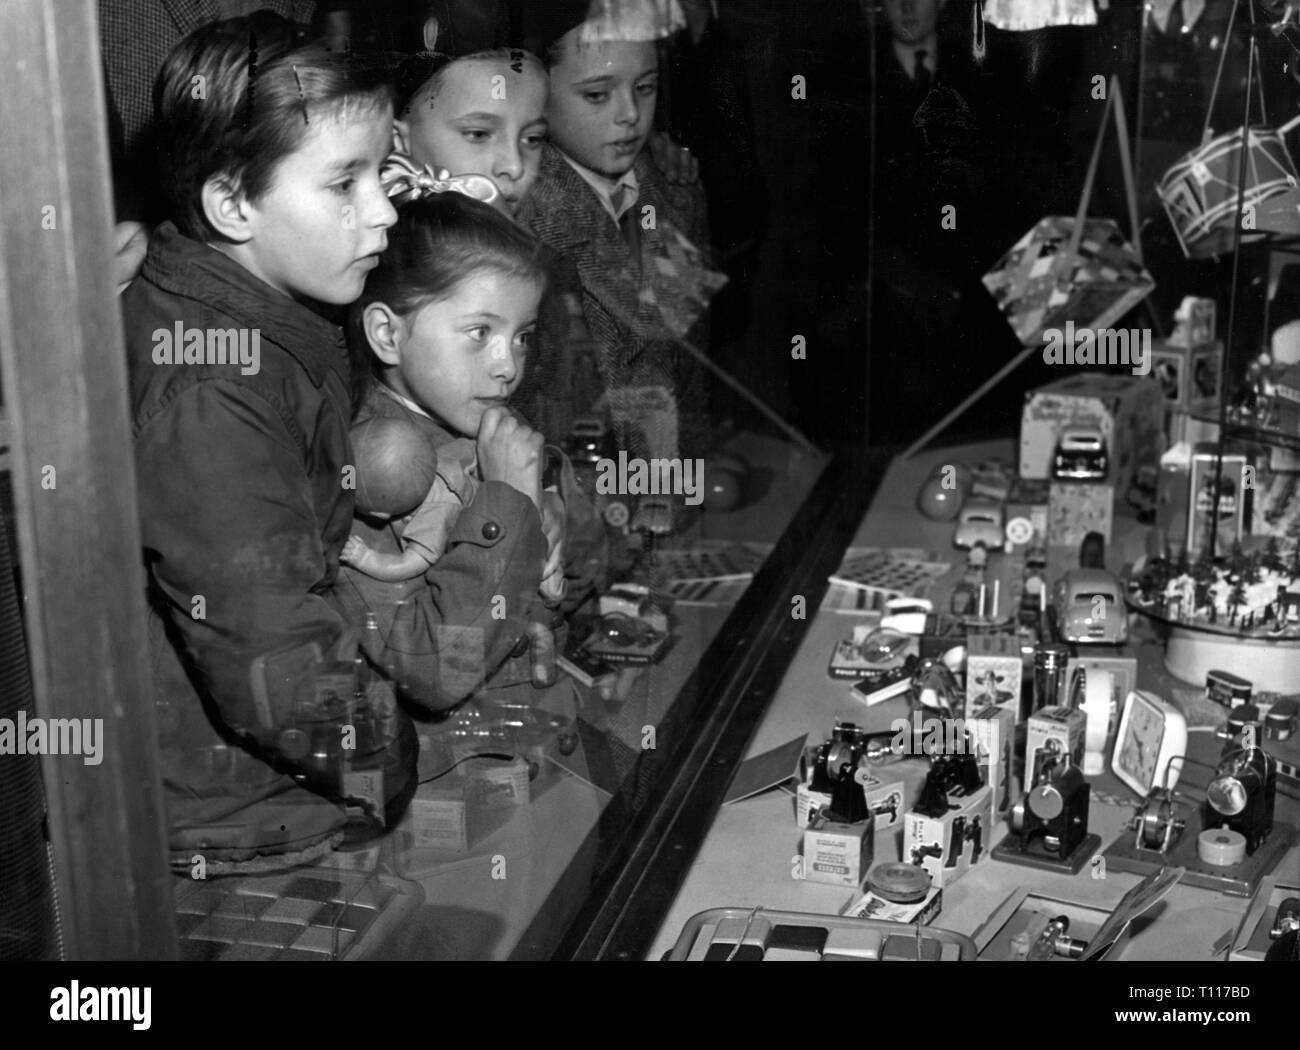 Christmas, shopping / presents, children of Hungarian refugees in front of shop window with toys, London, 24.12.1956, Additional-Rights-Clearance-Info-Not-Available Stock Photo